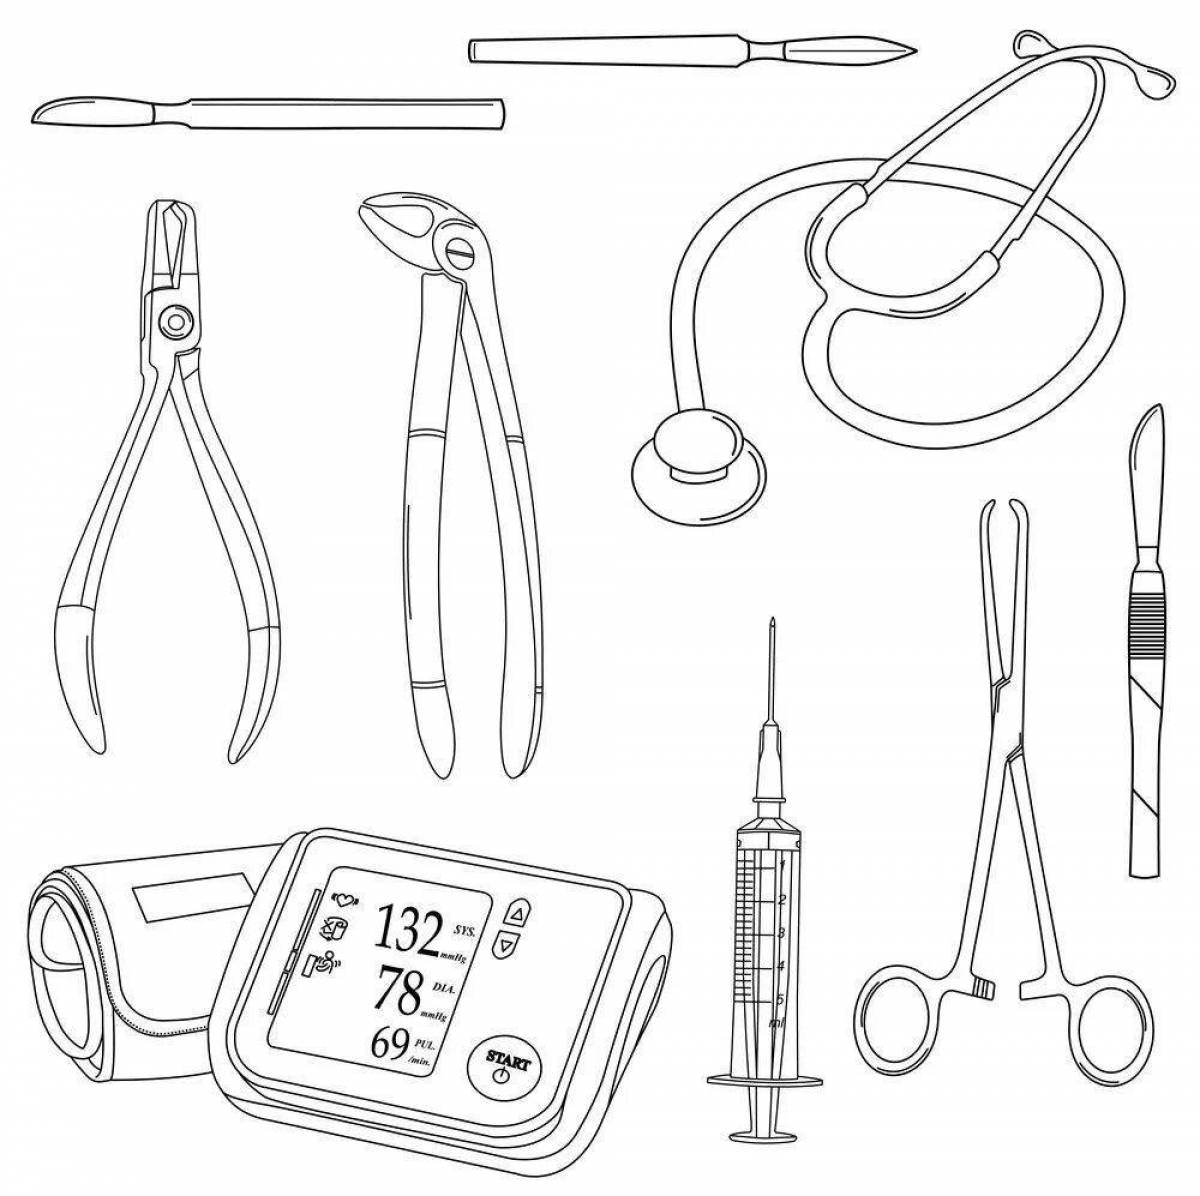 Colourful doctor's tools coloring book